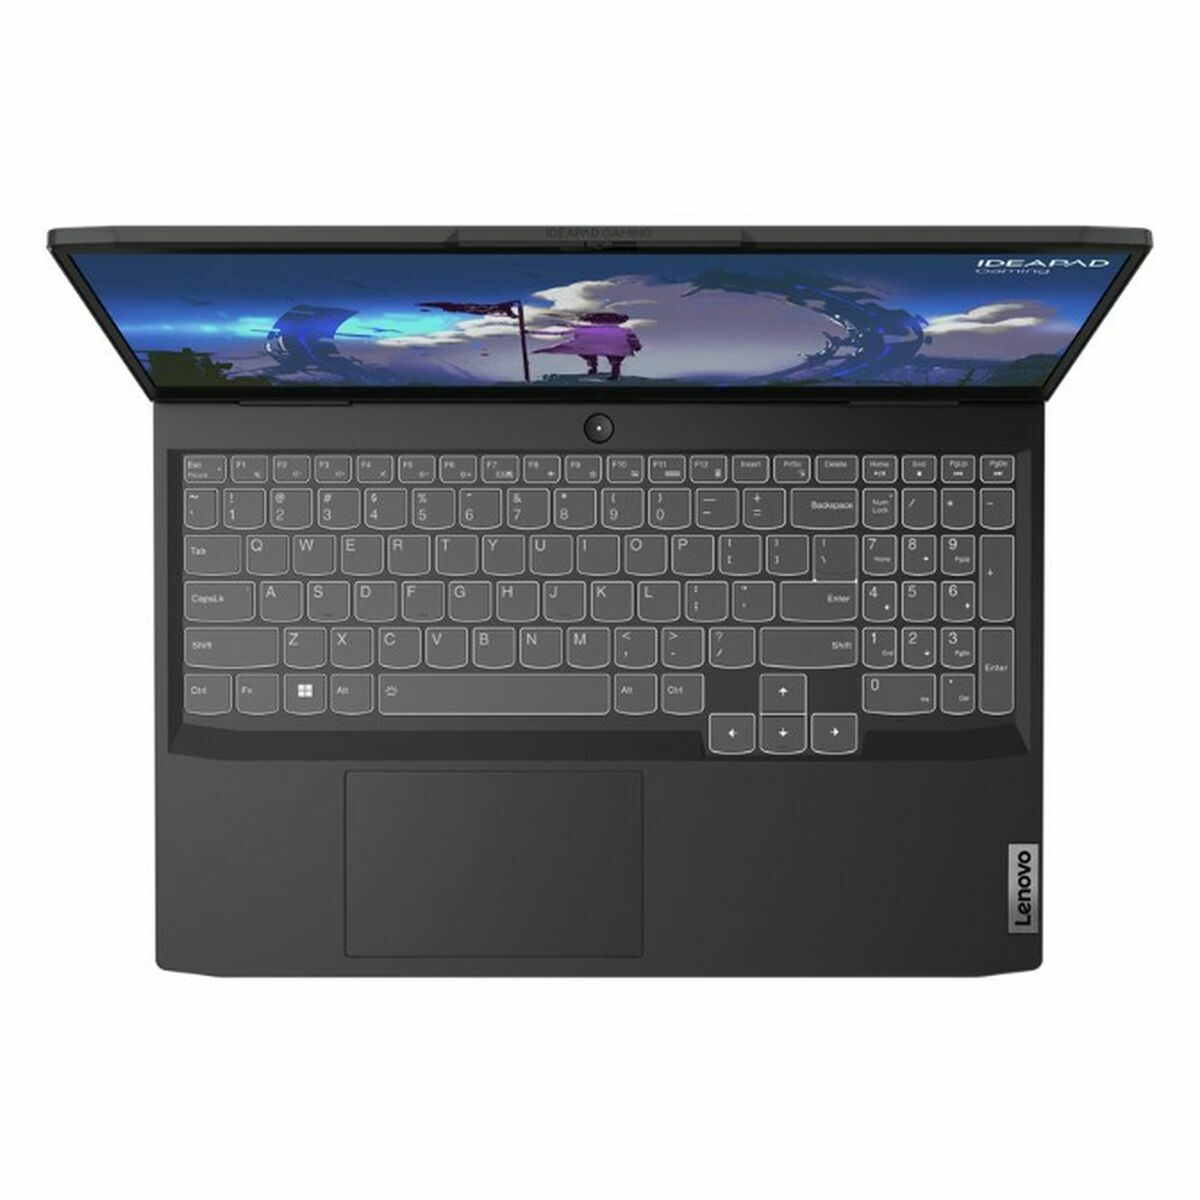 Laptop Lenovo Gaming 3 15IAH7 15,6" i7-12650H 16 GB RAM 512 GB SSD NVIDIA GeForce RTX 3050 Spanish Qwerty, Lenovo, Computing, notebook-lenovo-gaming-3-15iah7-16-gb-ram-15-6-i7-12650h-spanish-qwerty, :2-in-1, :512 GB, :Gaming Laptop, :Intel-i7, :QWERTY, :RAM 16 GB, :Touchscreen, Brand_Lenovo, category-reference-2609, category-reference-2791, category-reference-2797, category-reference-t-19685, Condition_NEW, office, Price_+ 1000, Teleworking, RiotNook